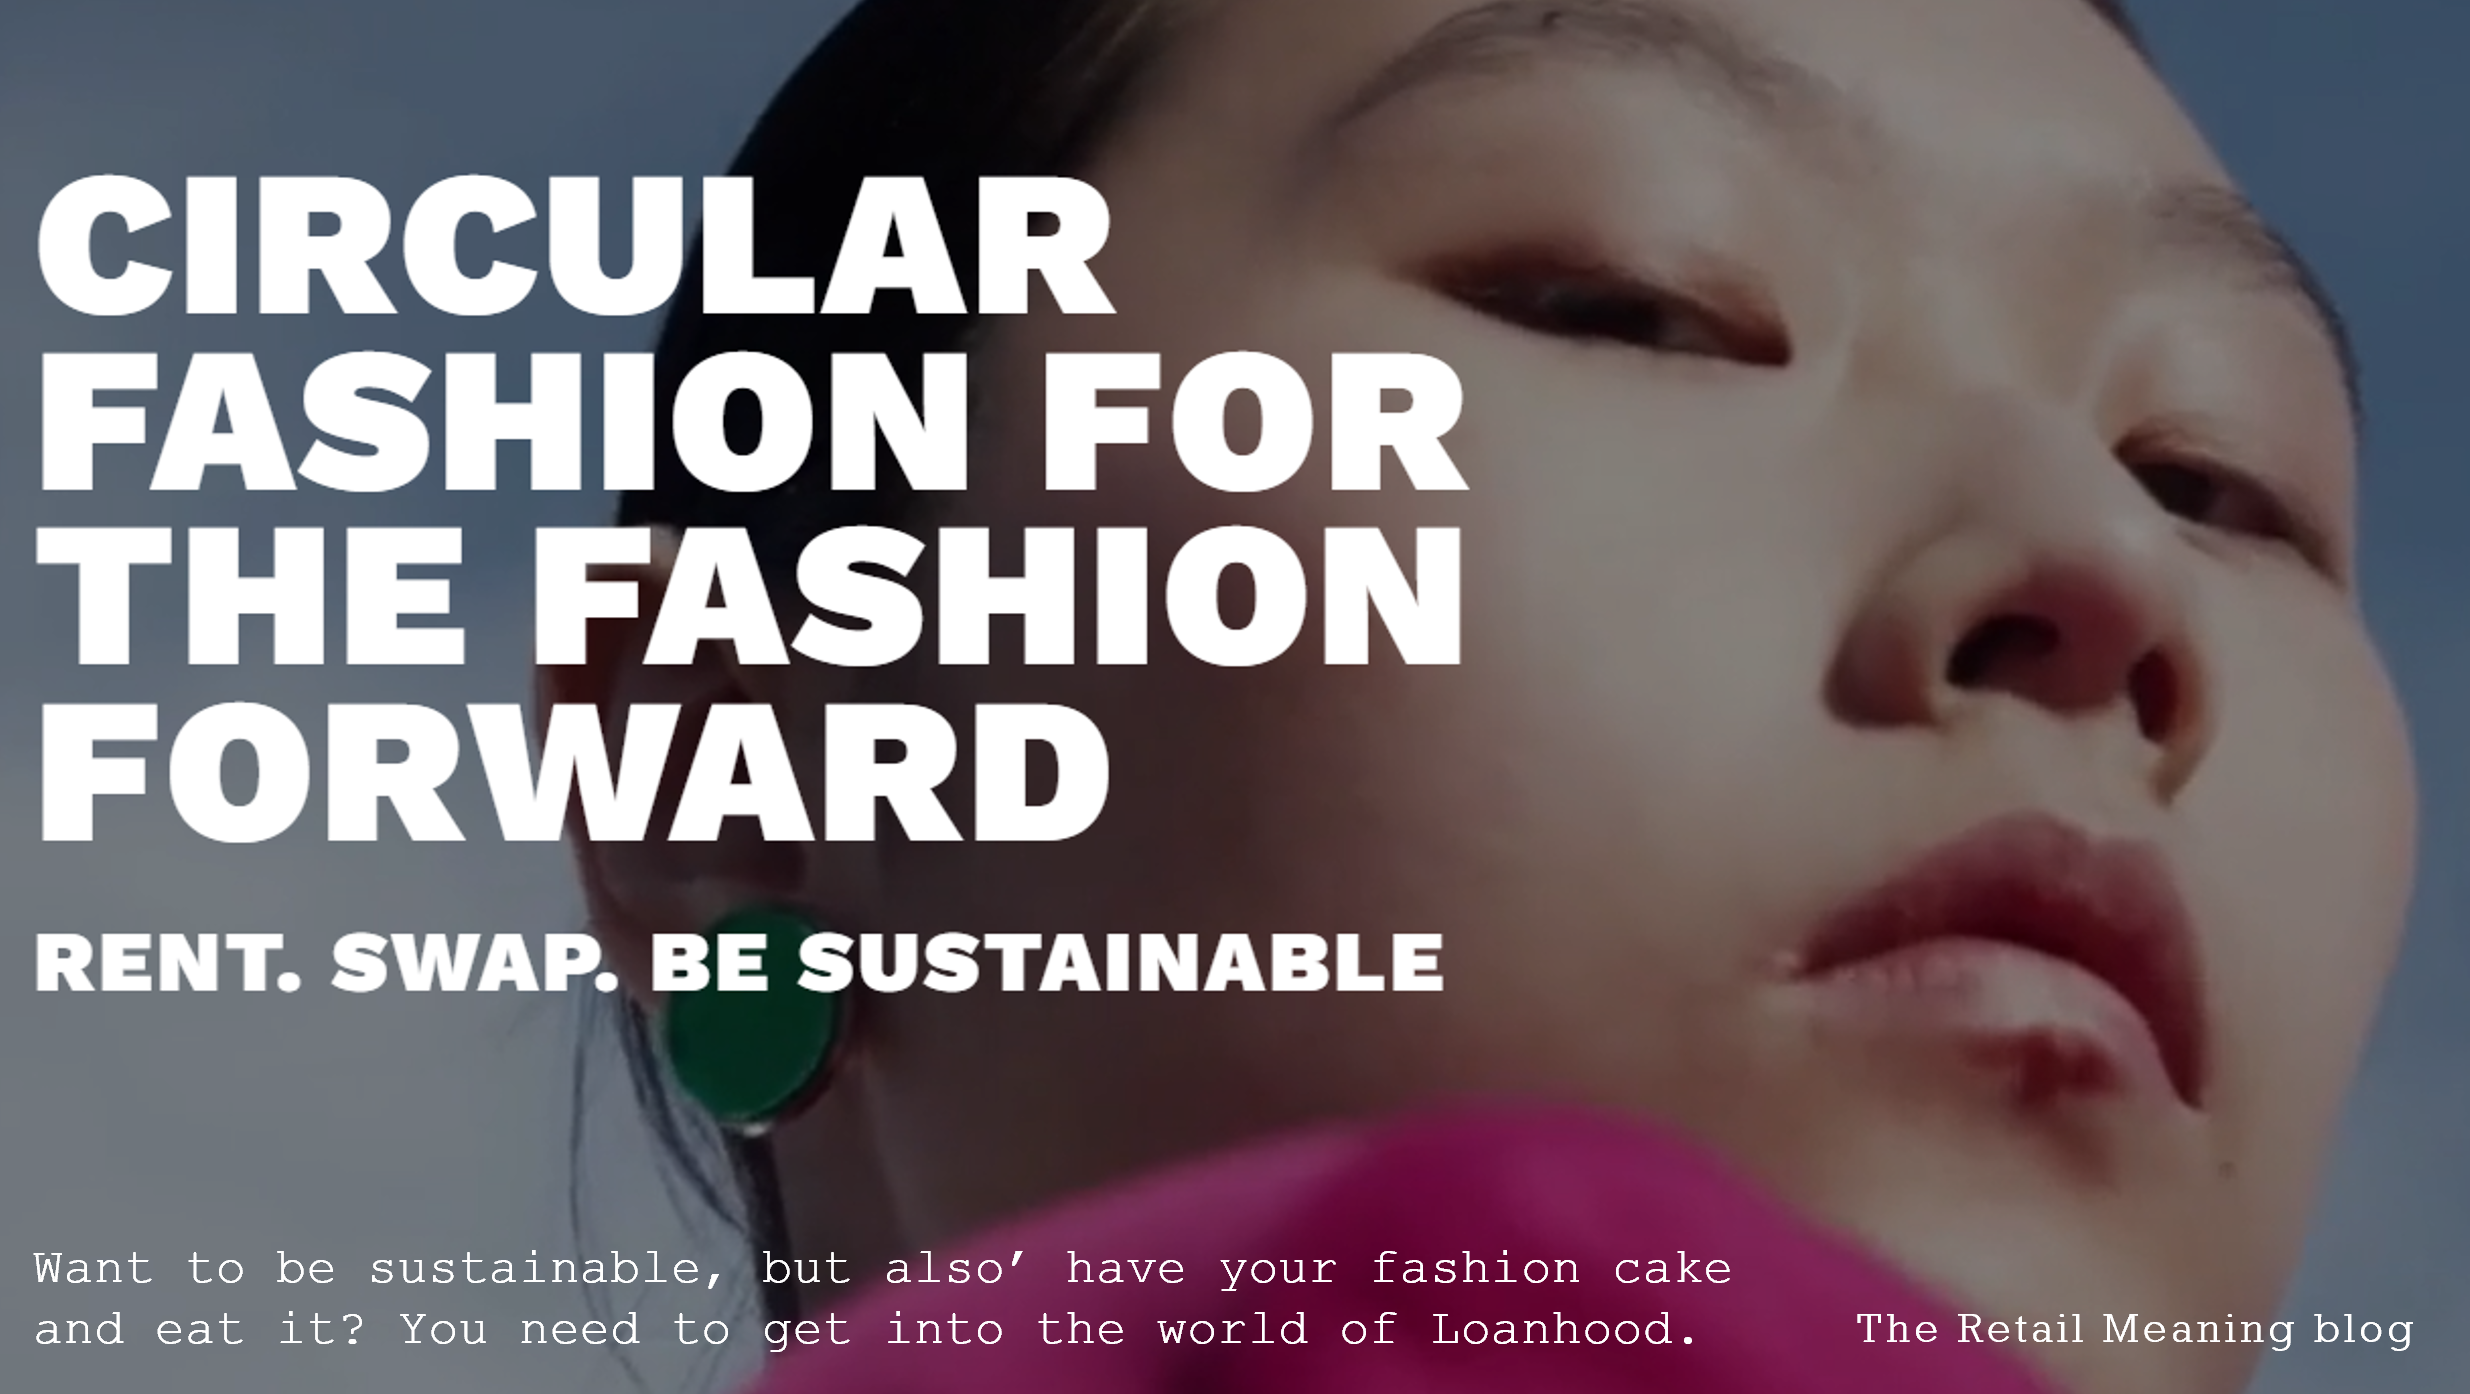 Want to be sustainable, but also’ have your fashion cake and eat it? You need to get into the world of Loanhood.